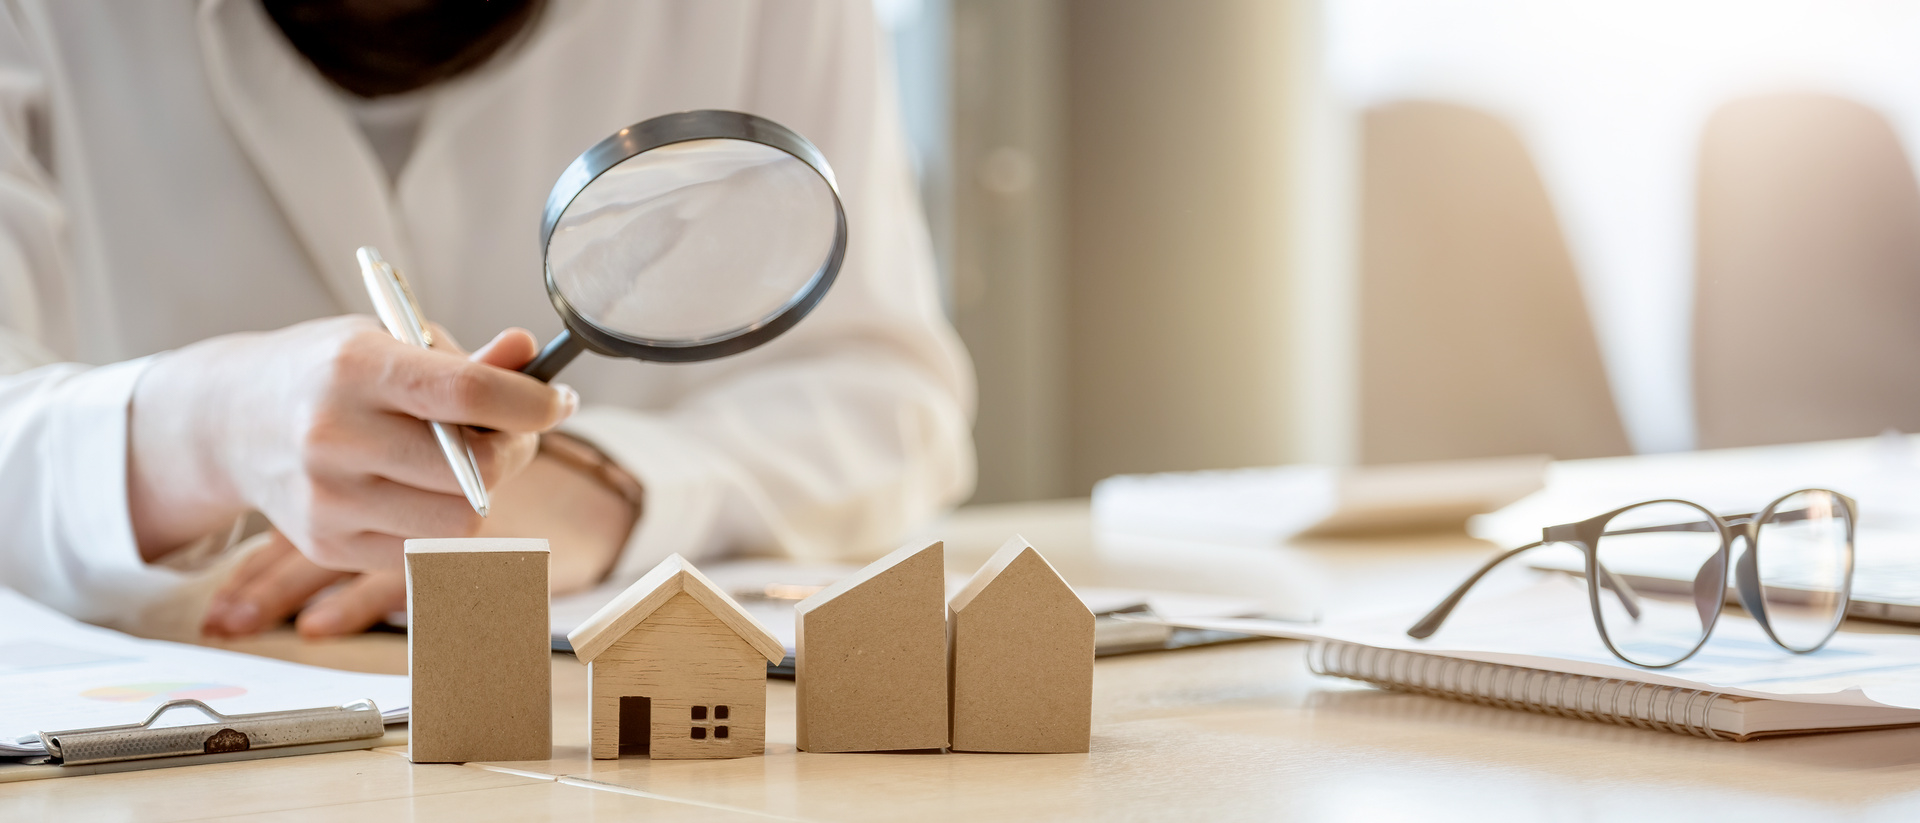 Looking for Real Estate Agency, Property Insurance, Mortgage Loan or New House. Woman with Magnifying Glass over a Wooden House at Her Office